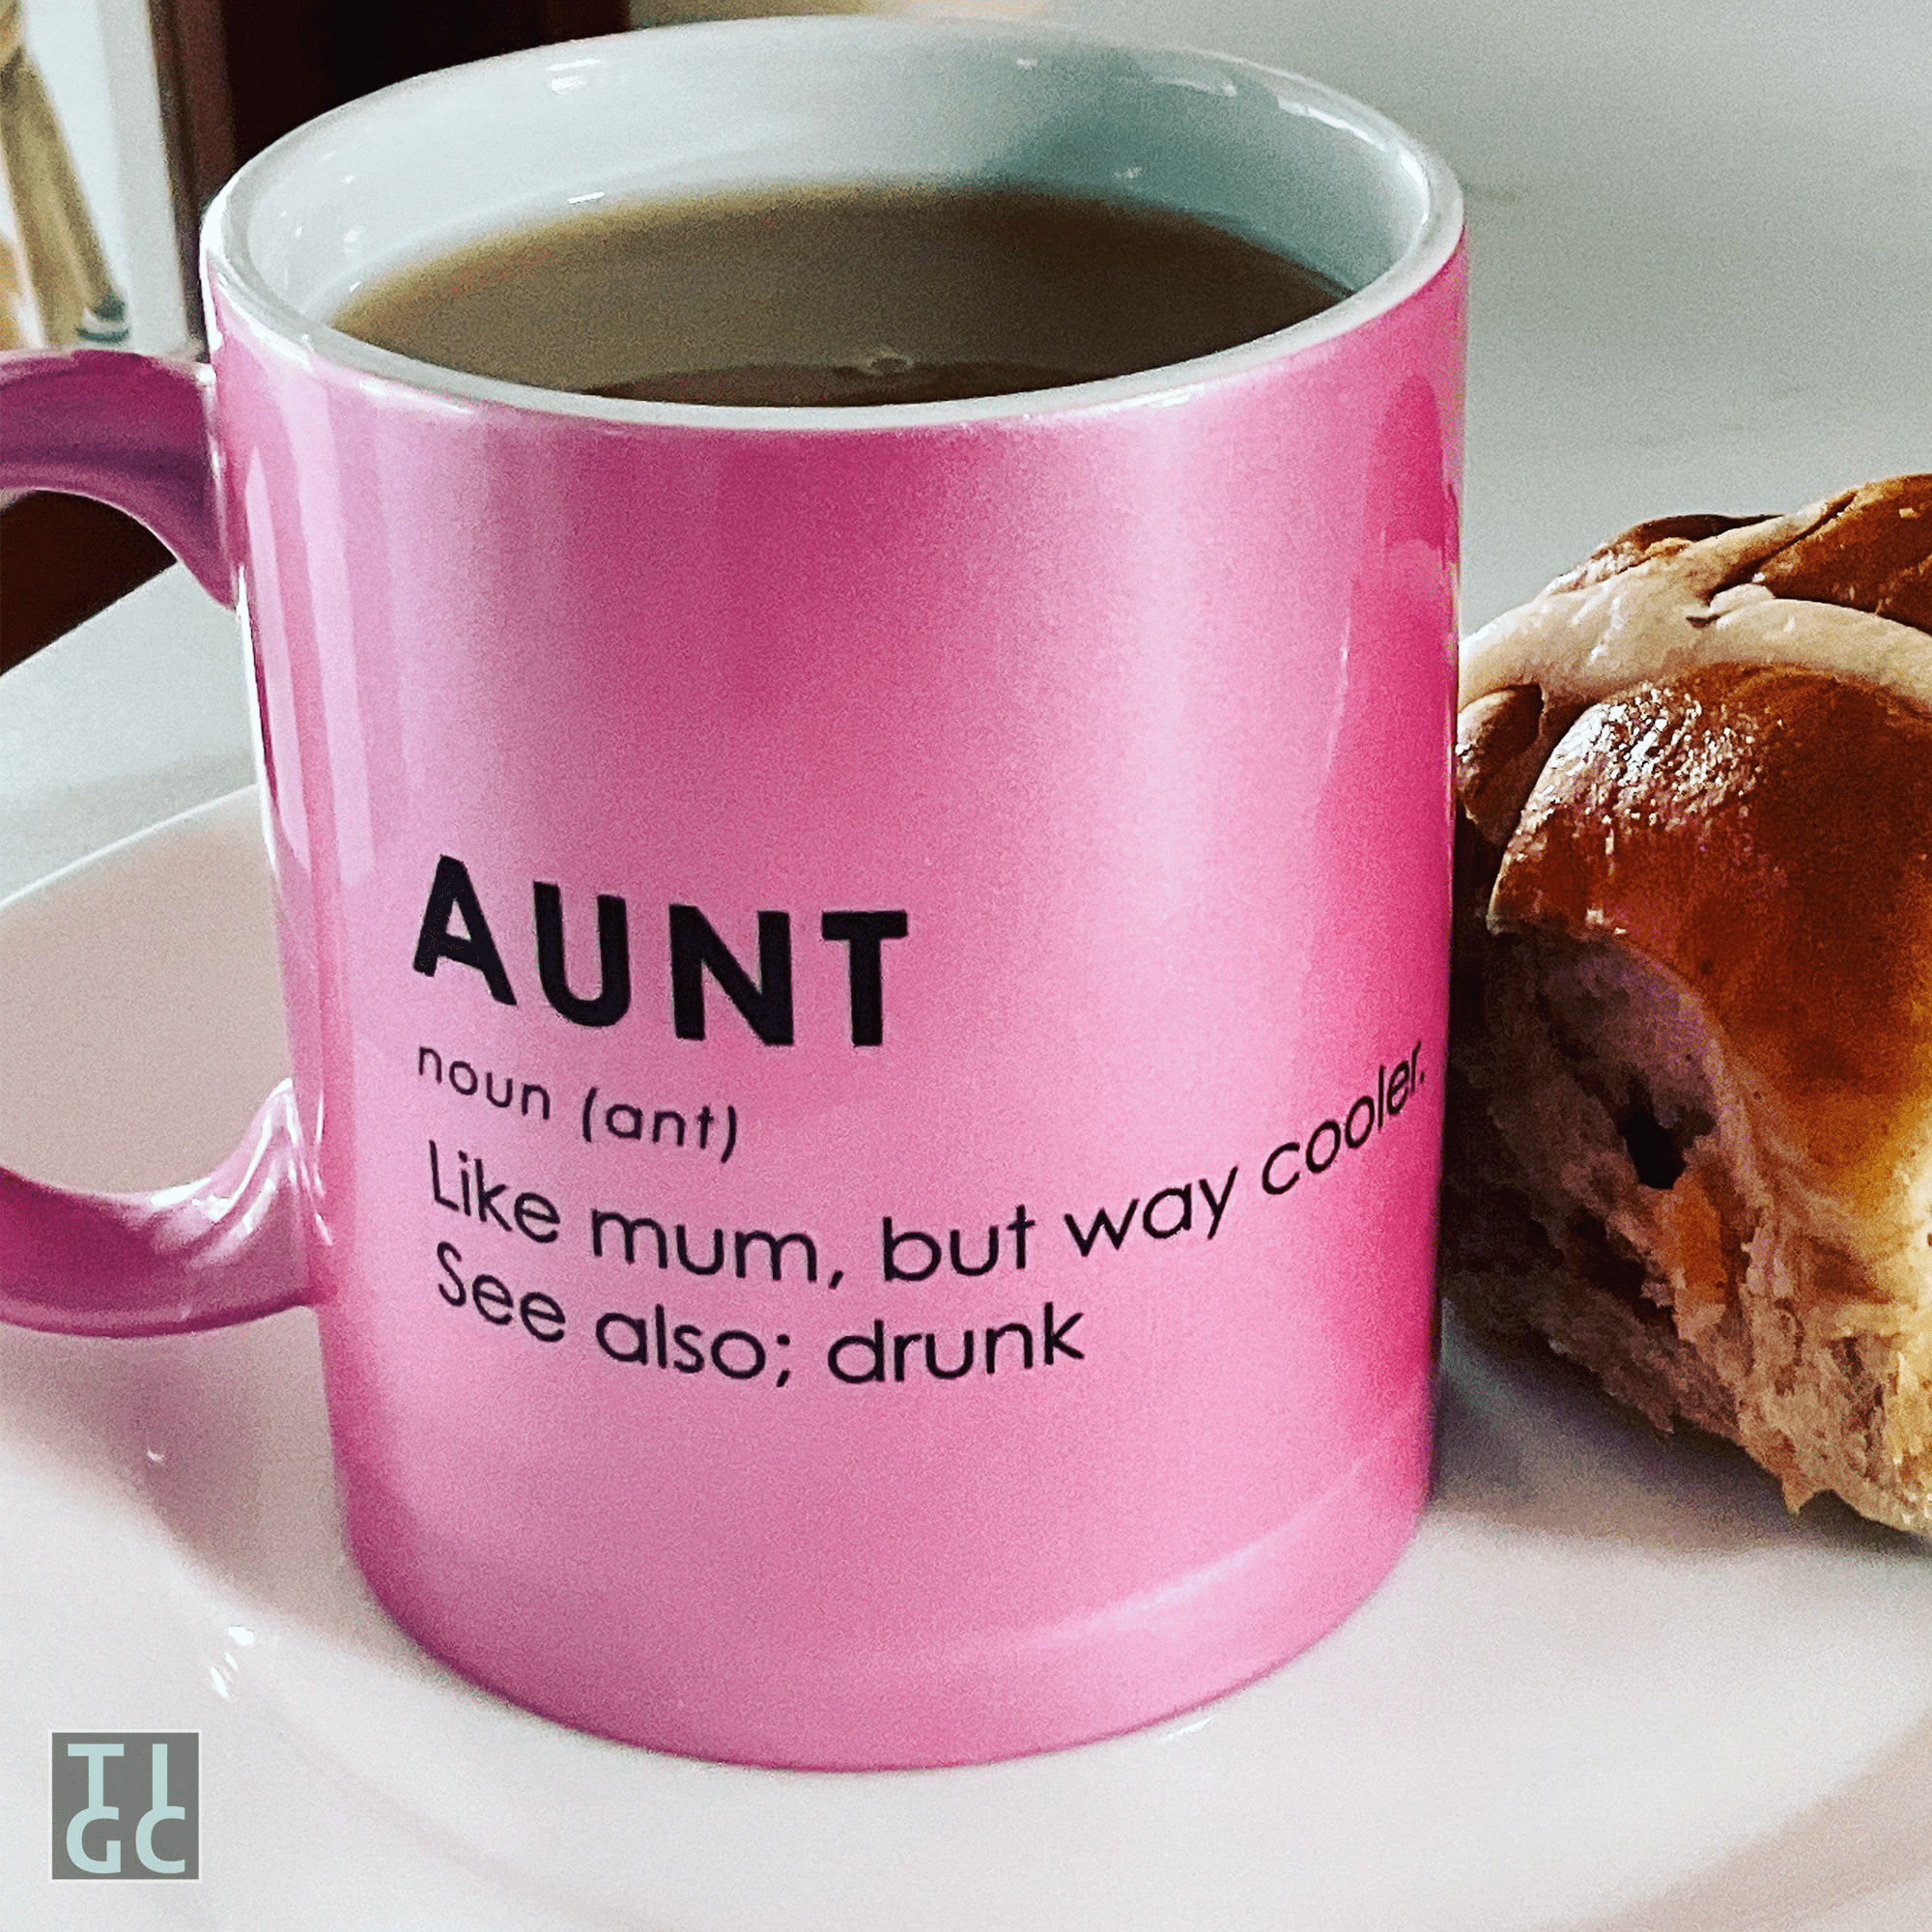 TIGC The Inappropriate Gift Co Aunt mug